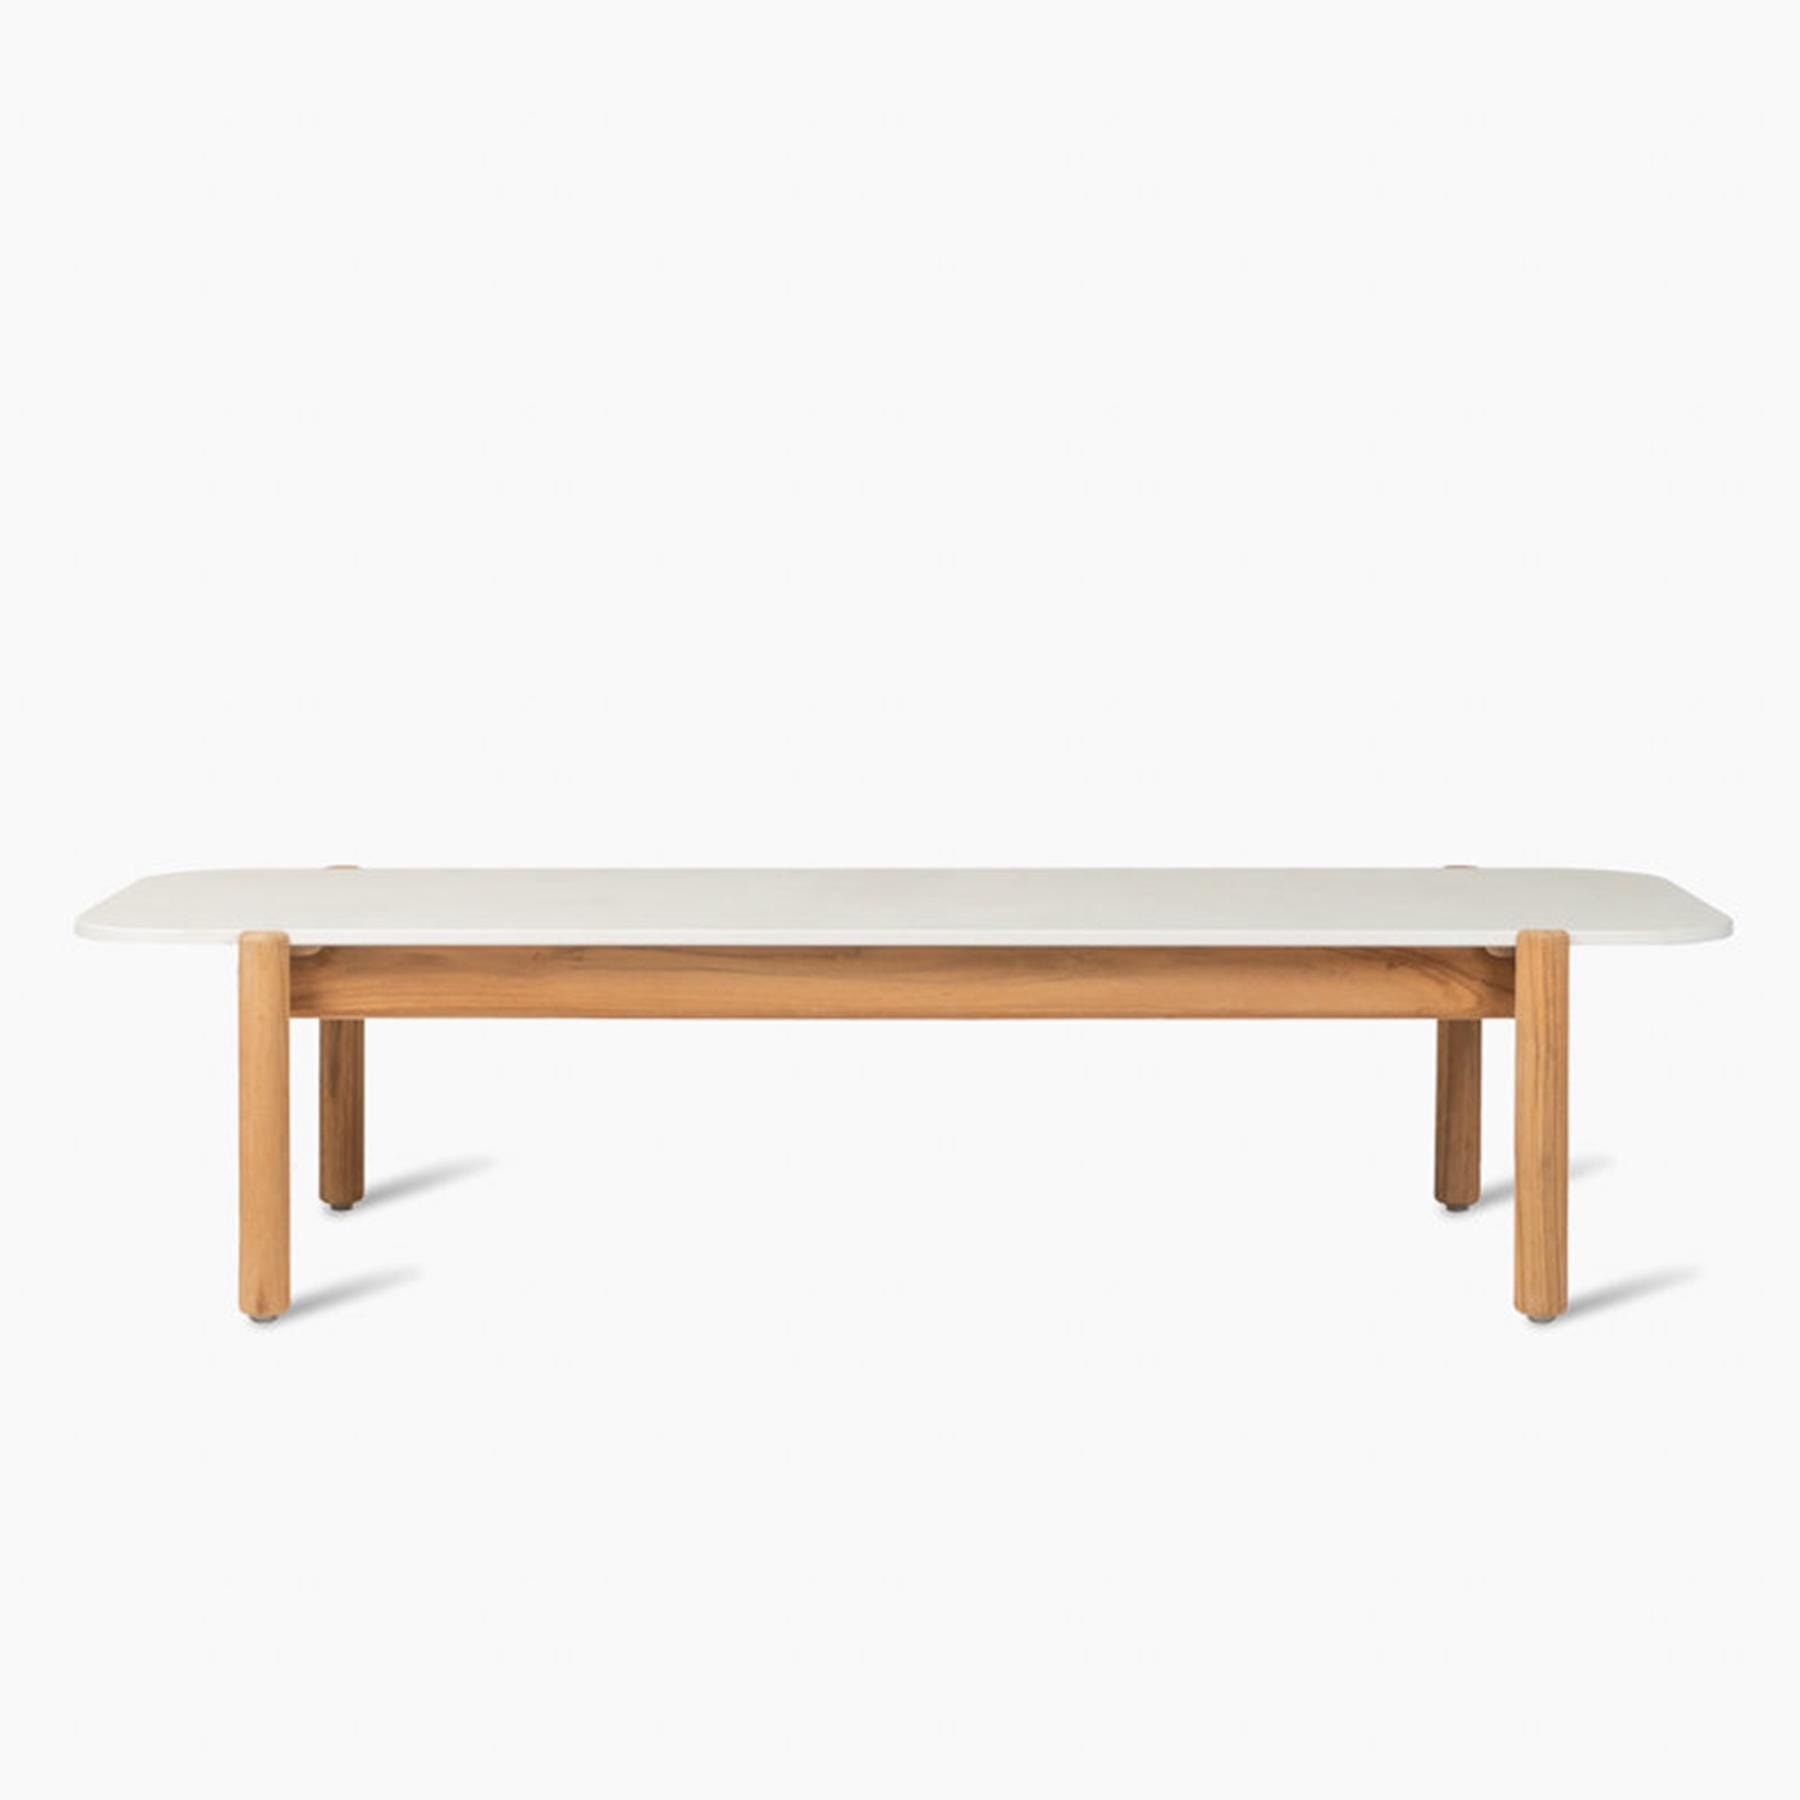 Vincent Sheppard Oda Garden Long Coffee Table Light Wood Designer Furniture From Holloways Of Ludlow